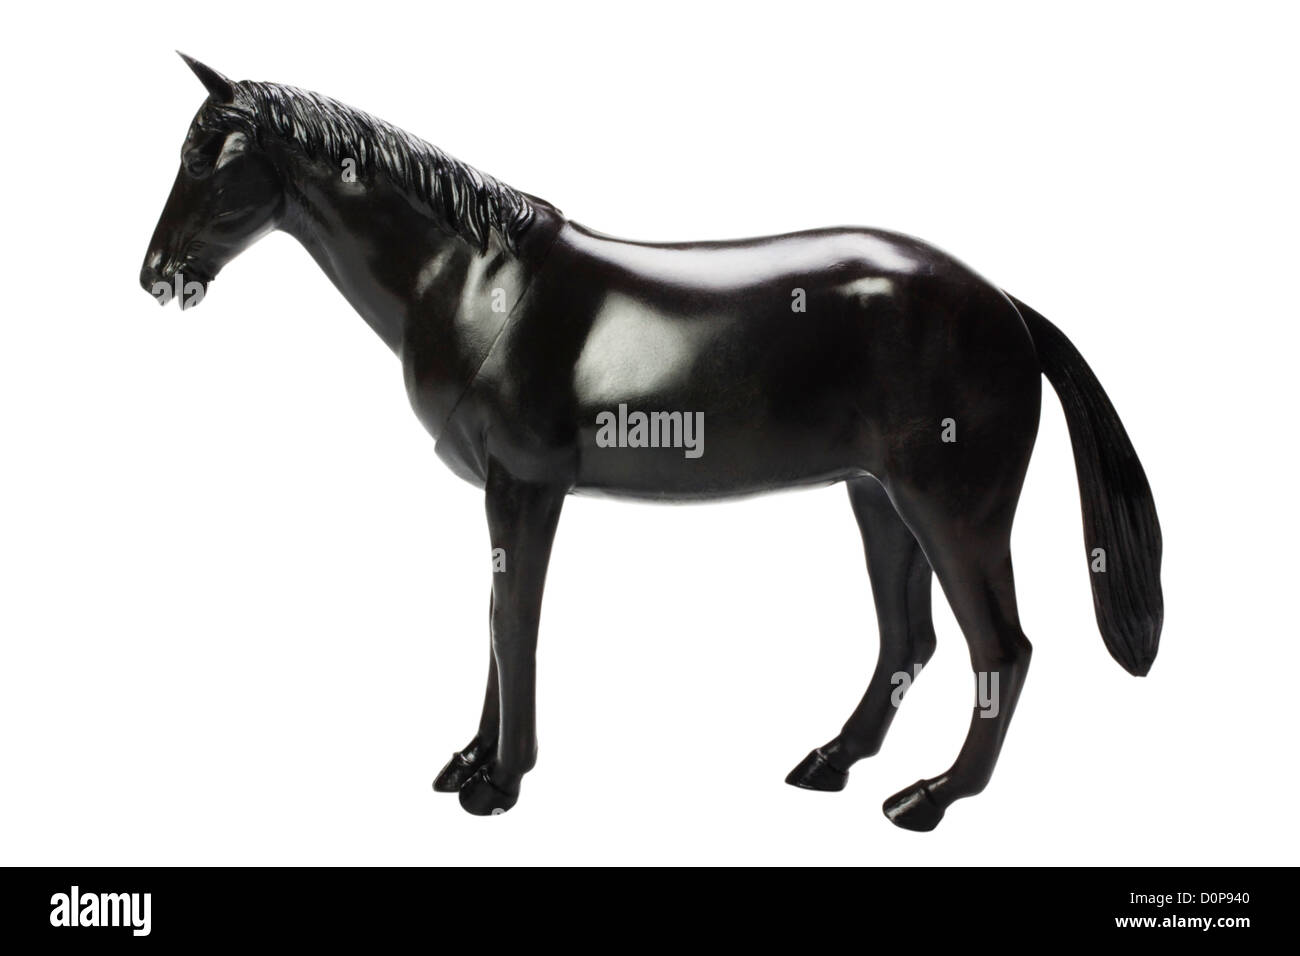 Close-up of a figurine of horse Stock Photo